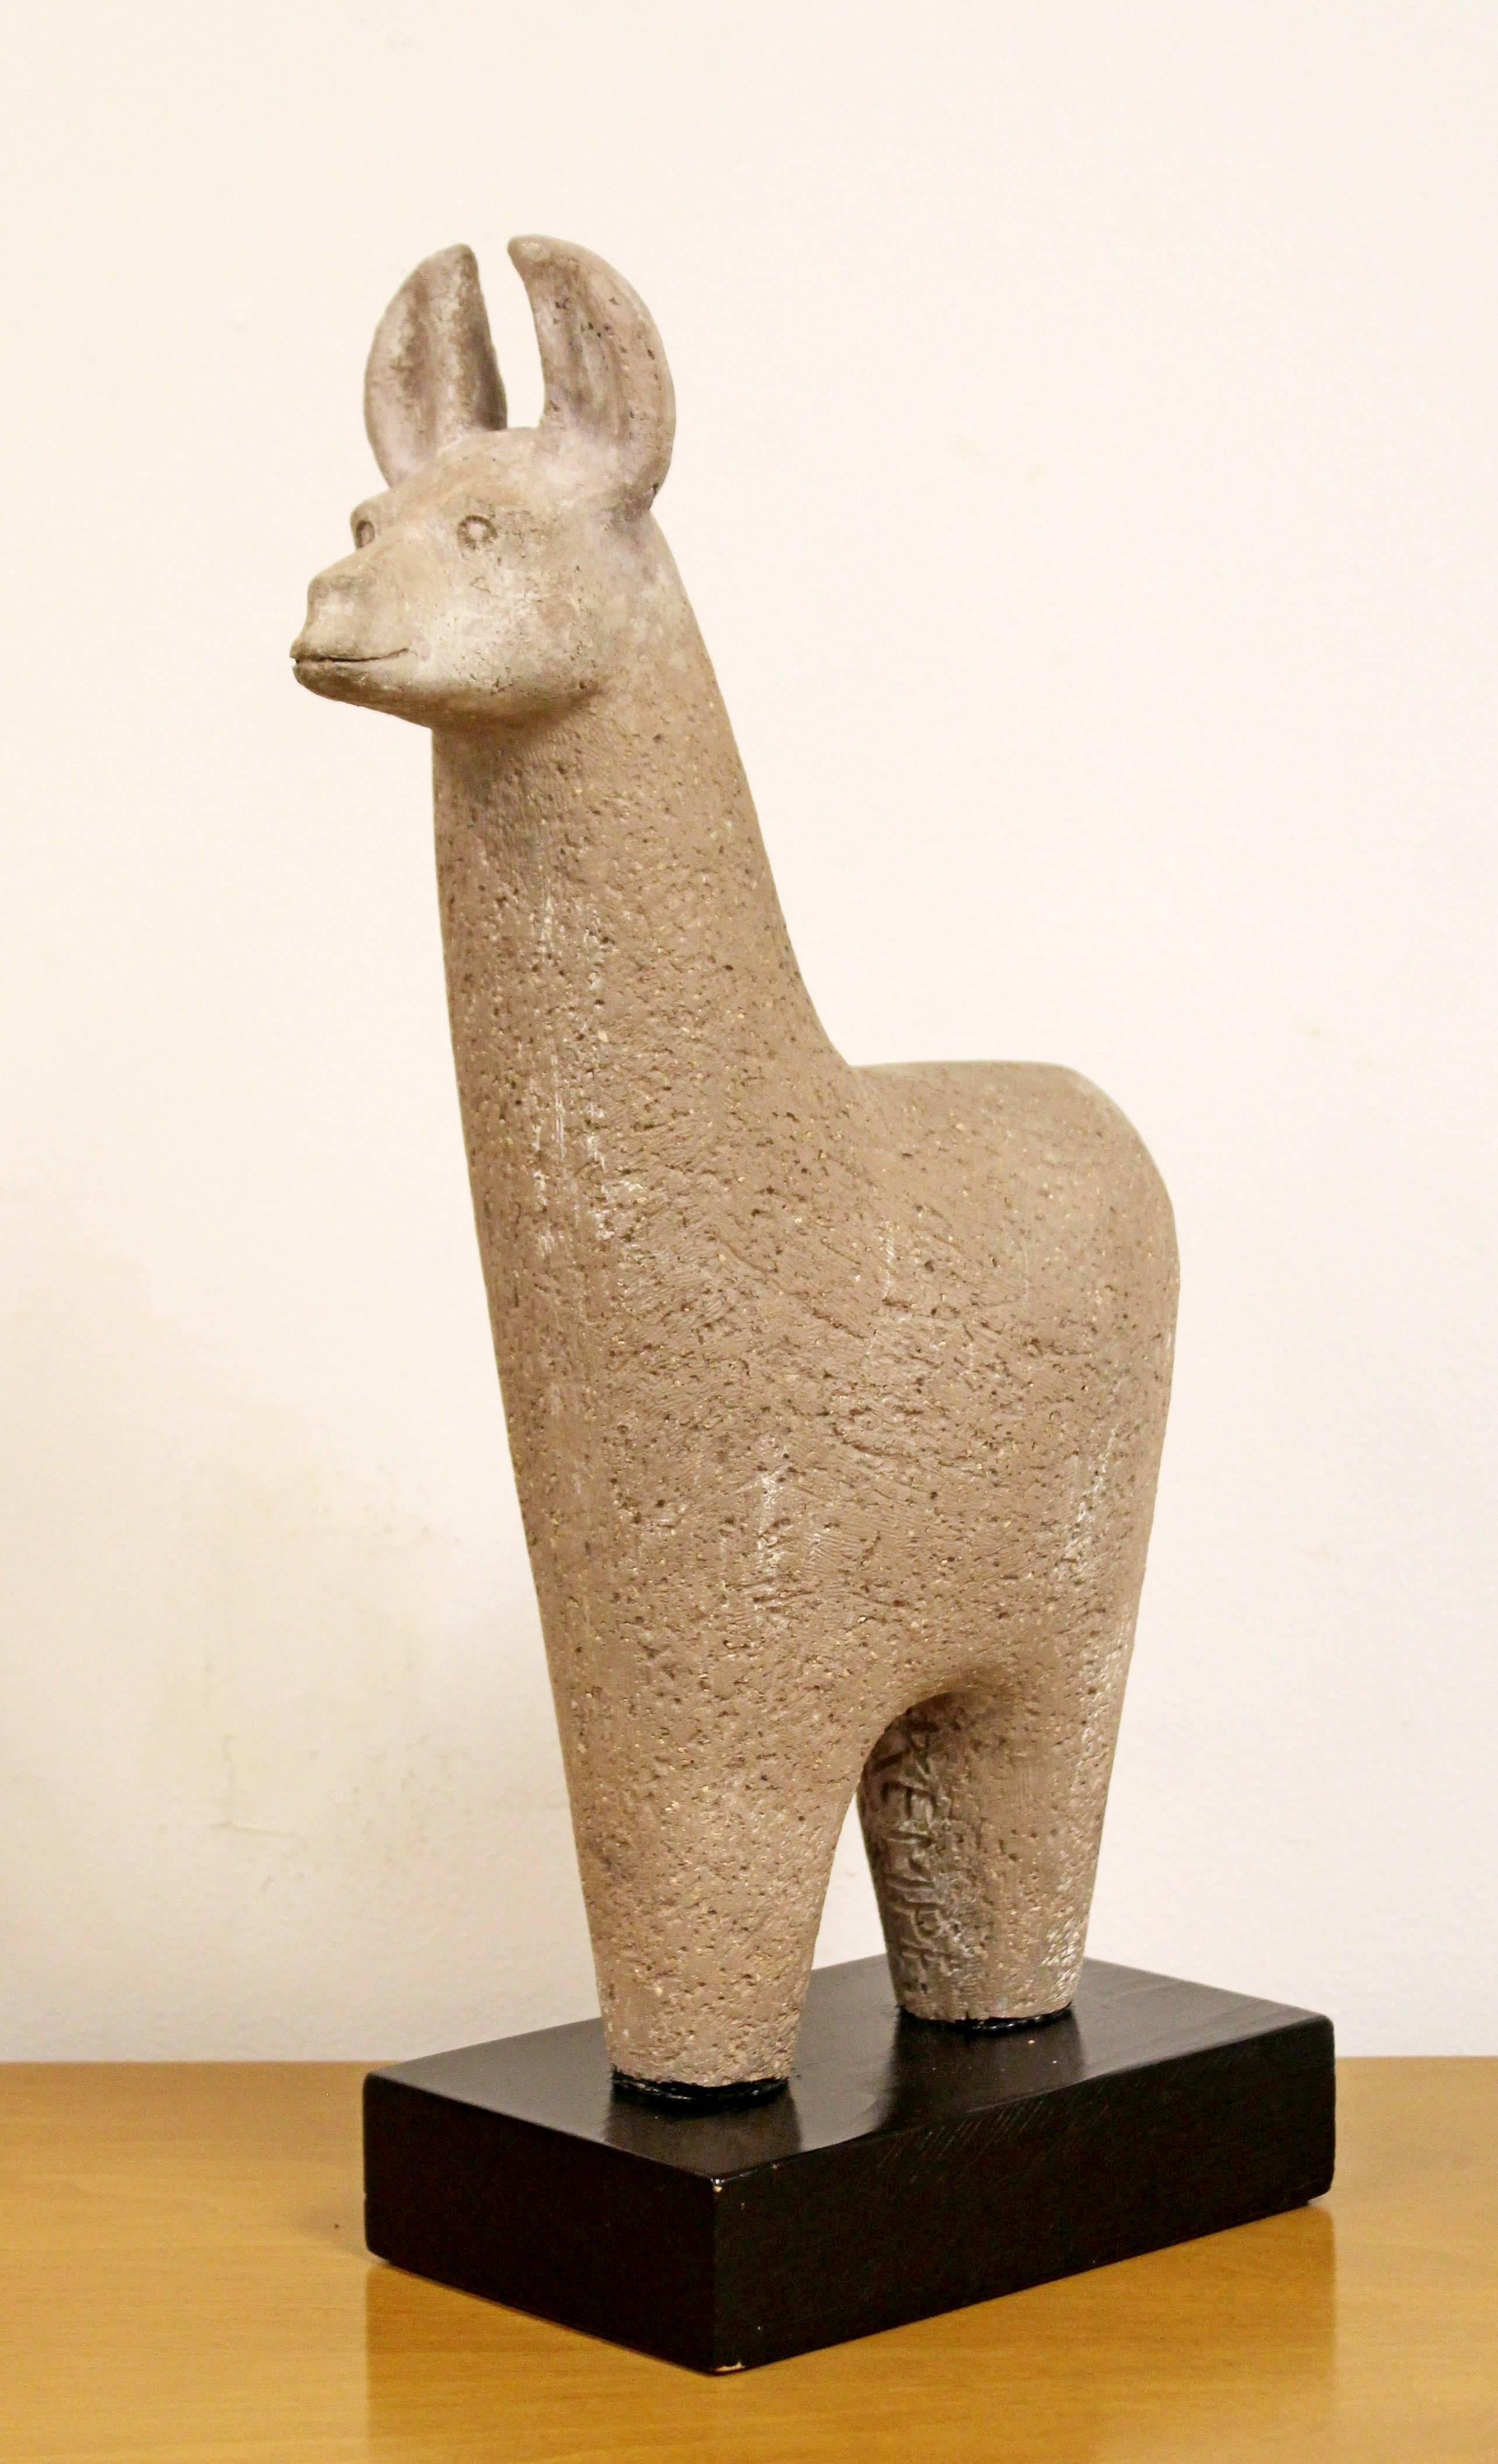 For your consideration is a gorgeous, ceramic, table sculpture of a llama, signed Kempe. In excellent condition. The dimensions are 8